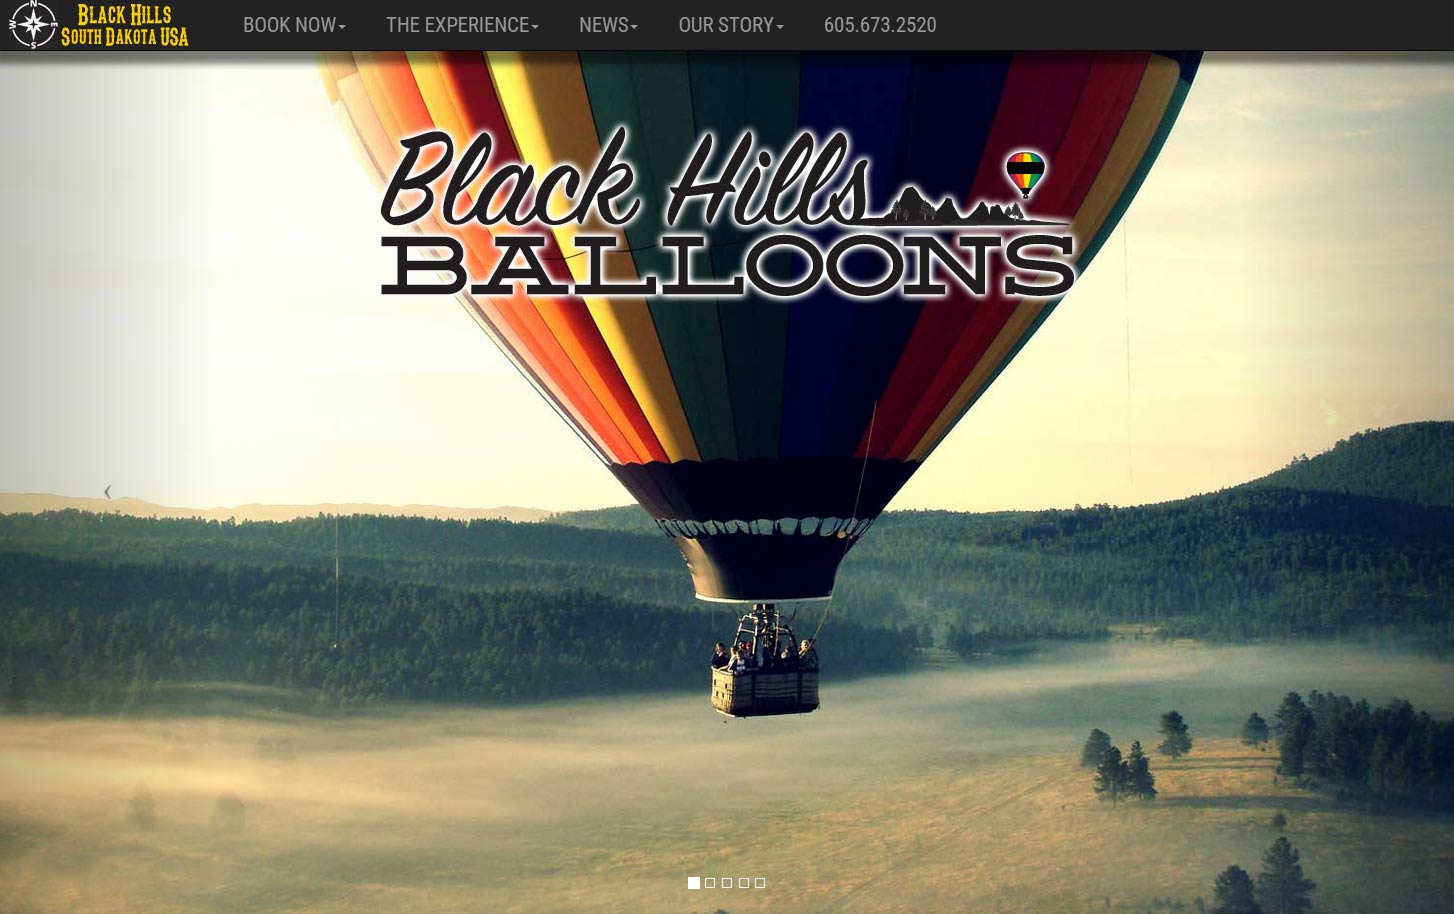 graphical interface, My Orlando Computer Repair, custom reservation system, booking, hot air balloon rides, web development